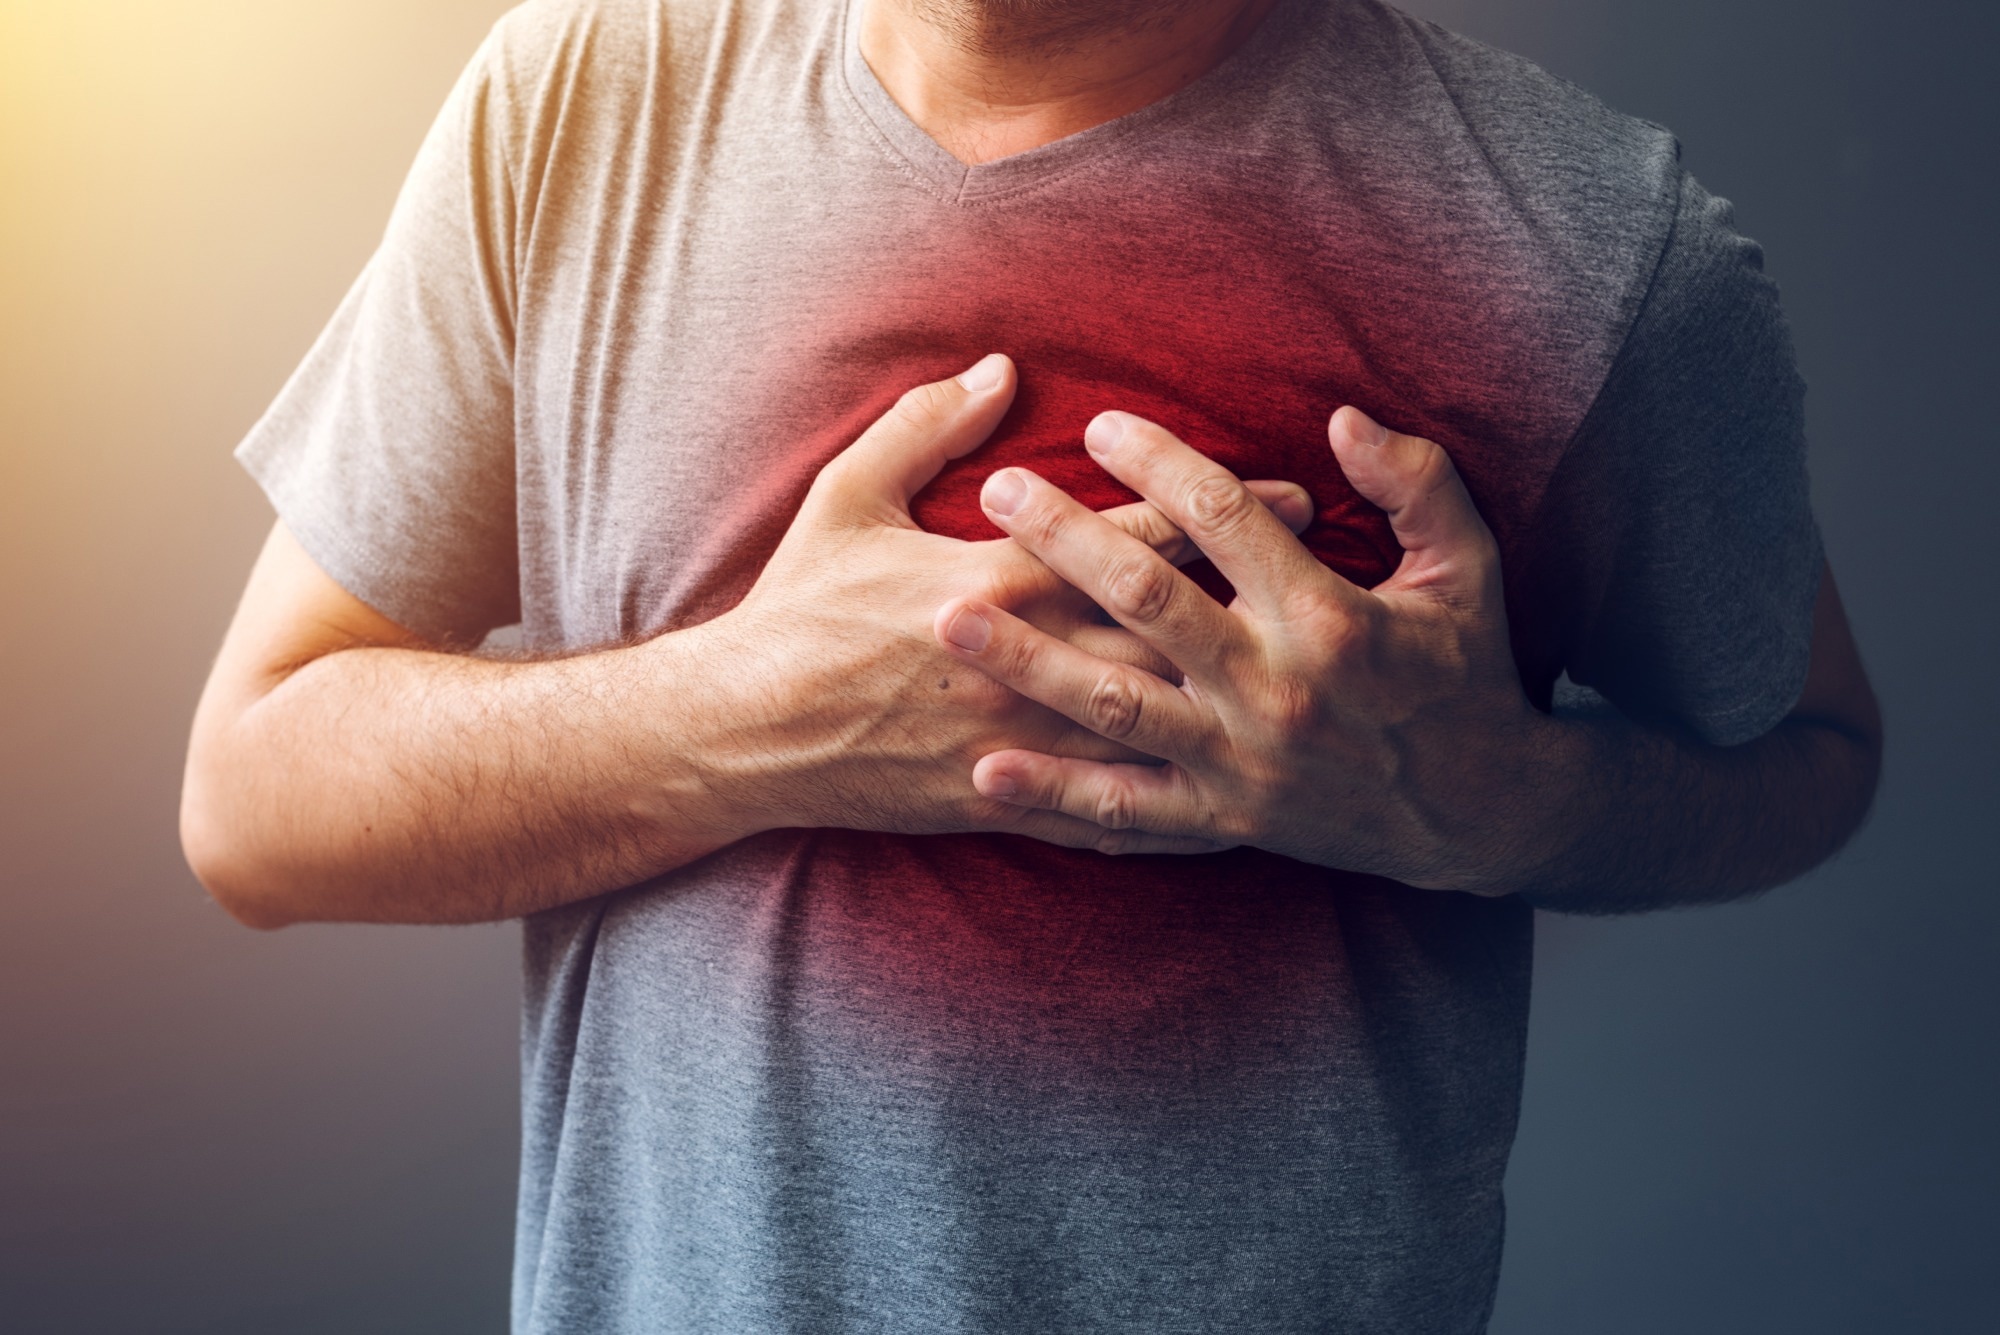 Study: Association of Cannabis Use With Cardiovascular Outcomes Among US Adults. Image Credit: Bits And Splits / Shutterstock